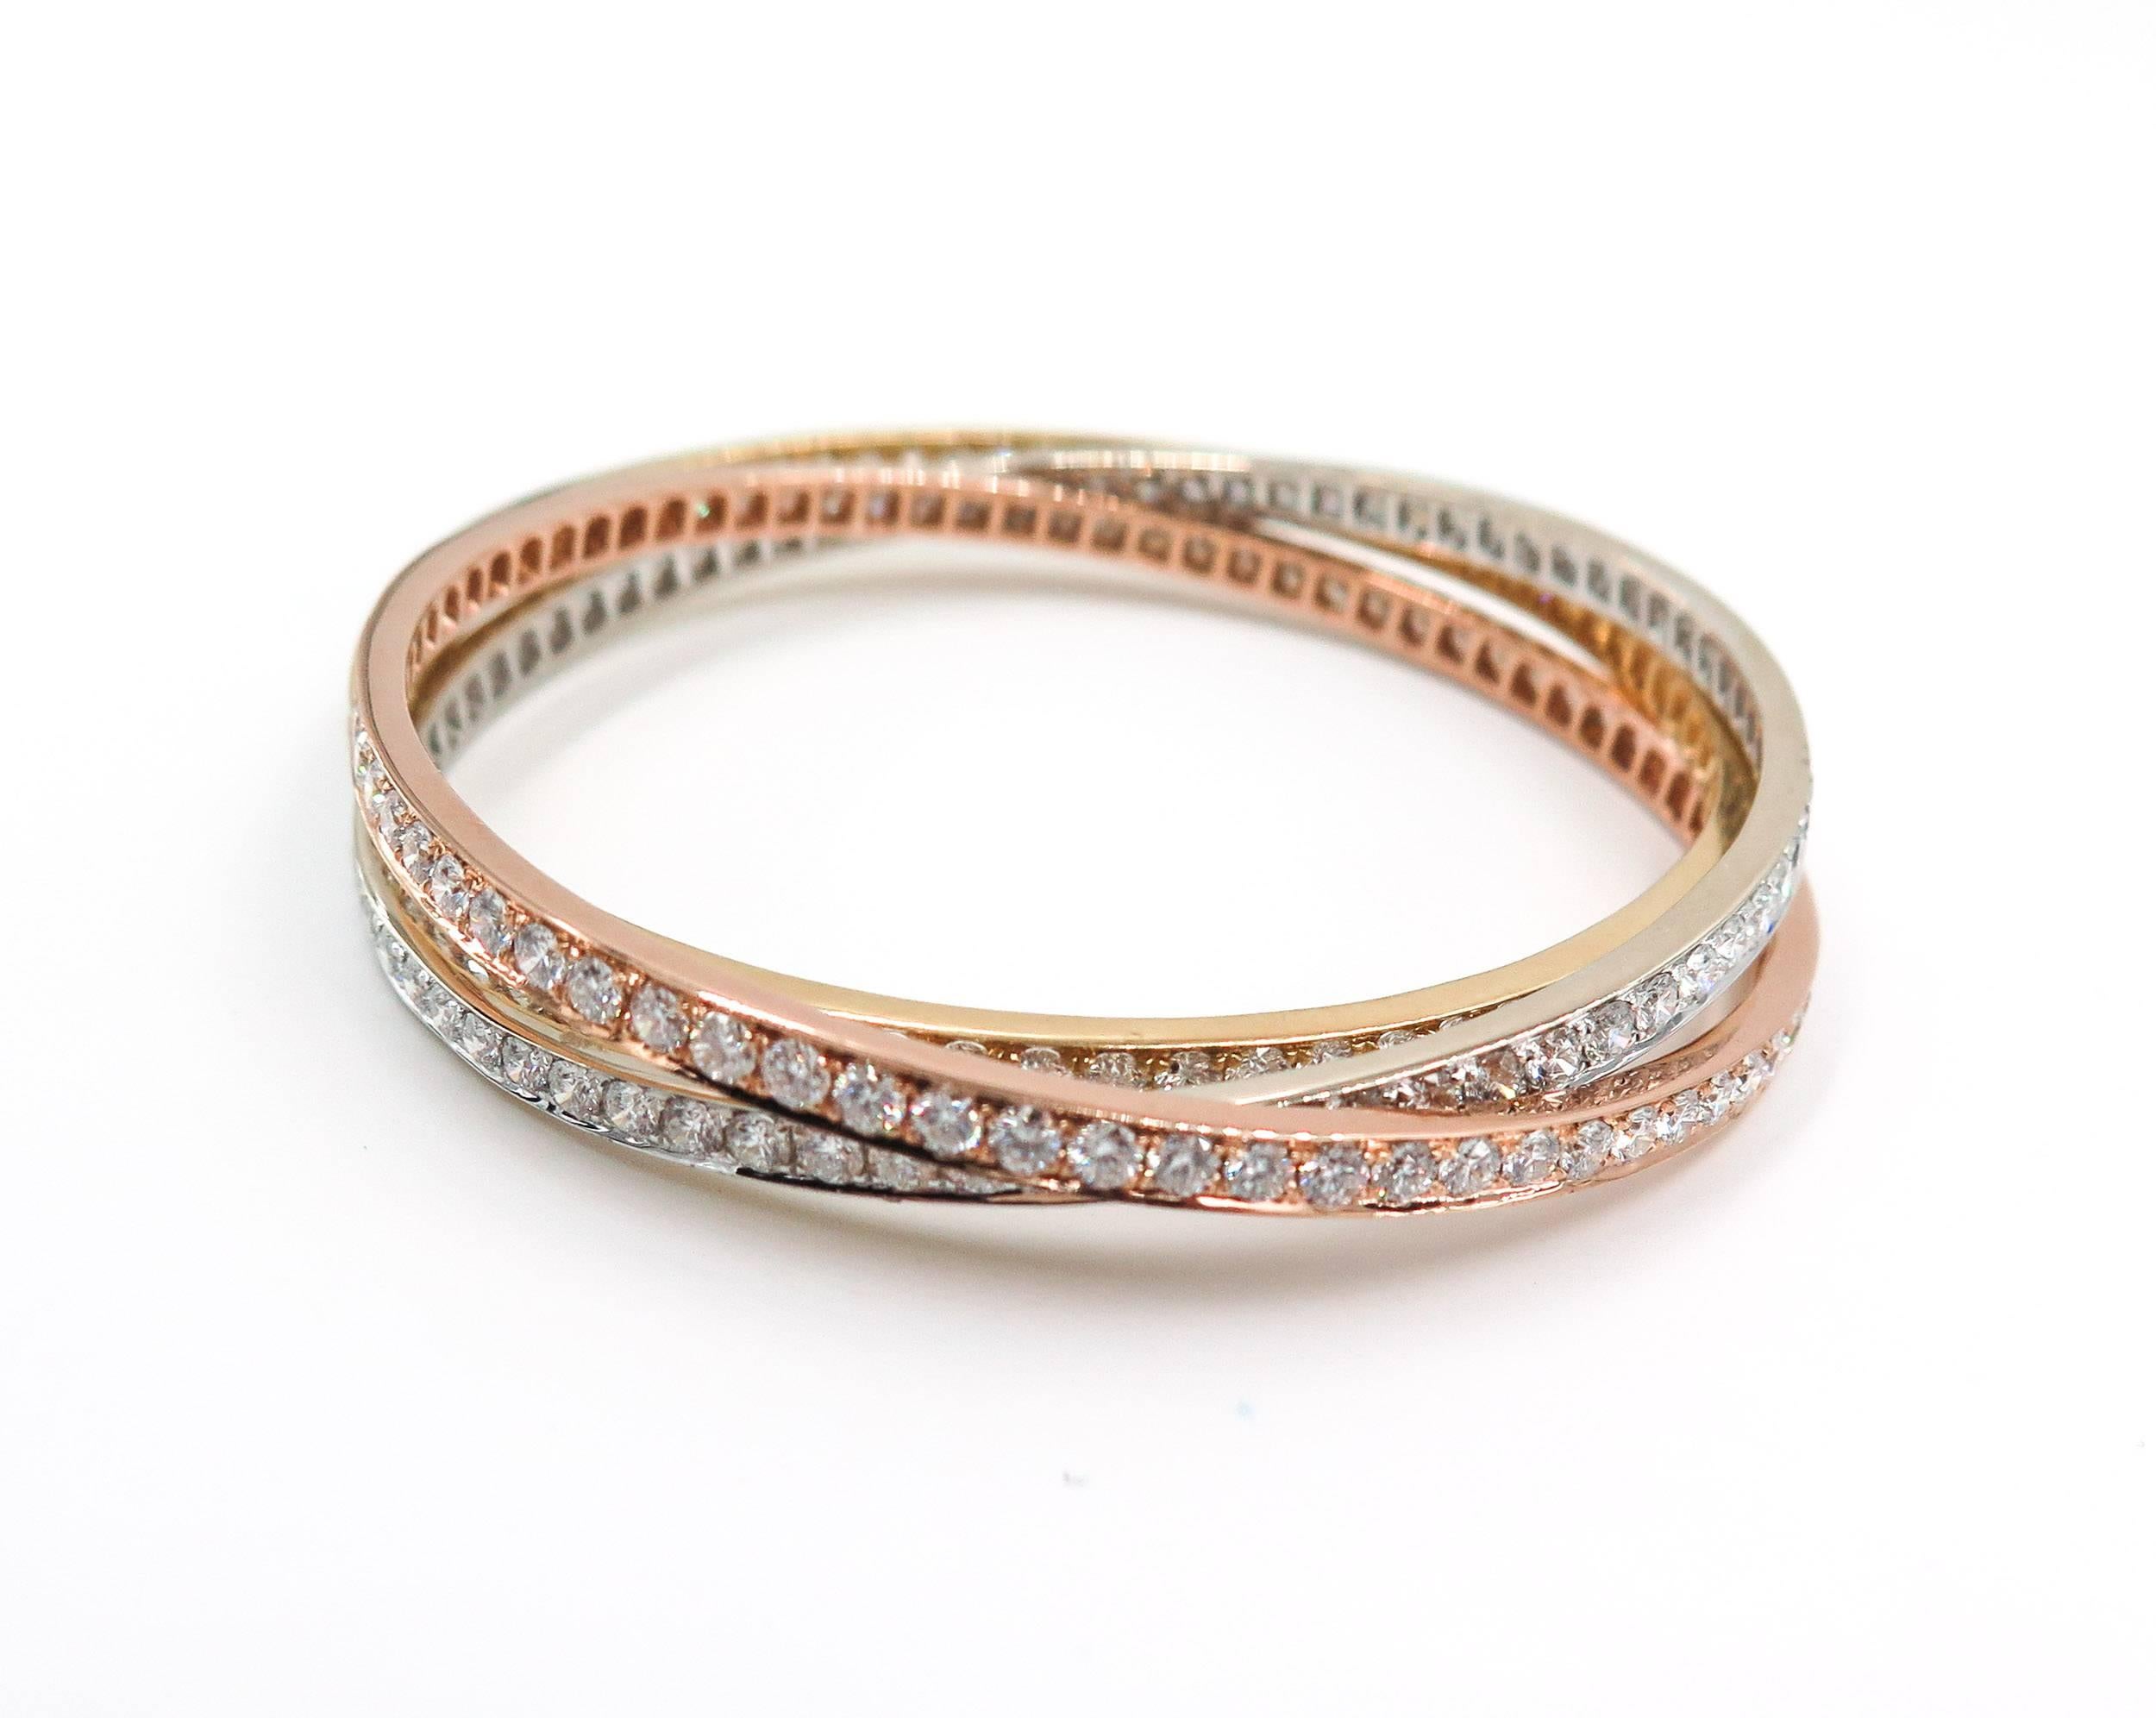 Rolling bangle bracelet, composed of three interlocking bangles in 18k yellow, rose and white gold. The gold bangle bracelets are set with 12.98 total carats of round-cut white diamonds. Slip on. Intended for small-sized wrists (63mm interior